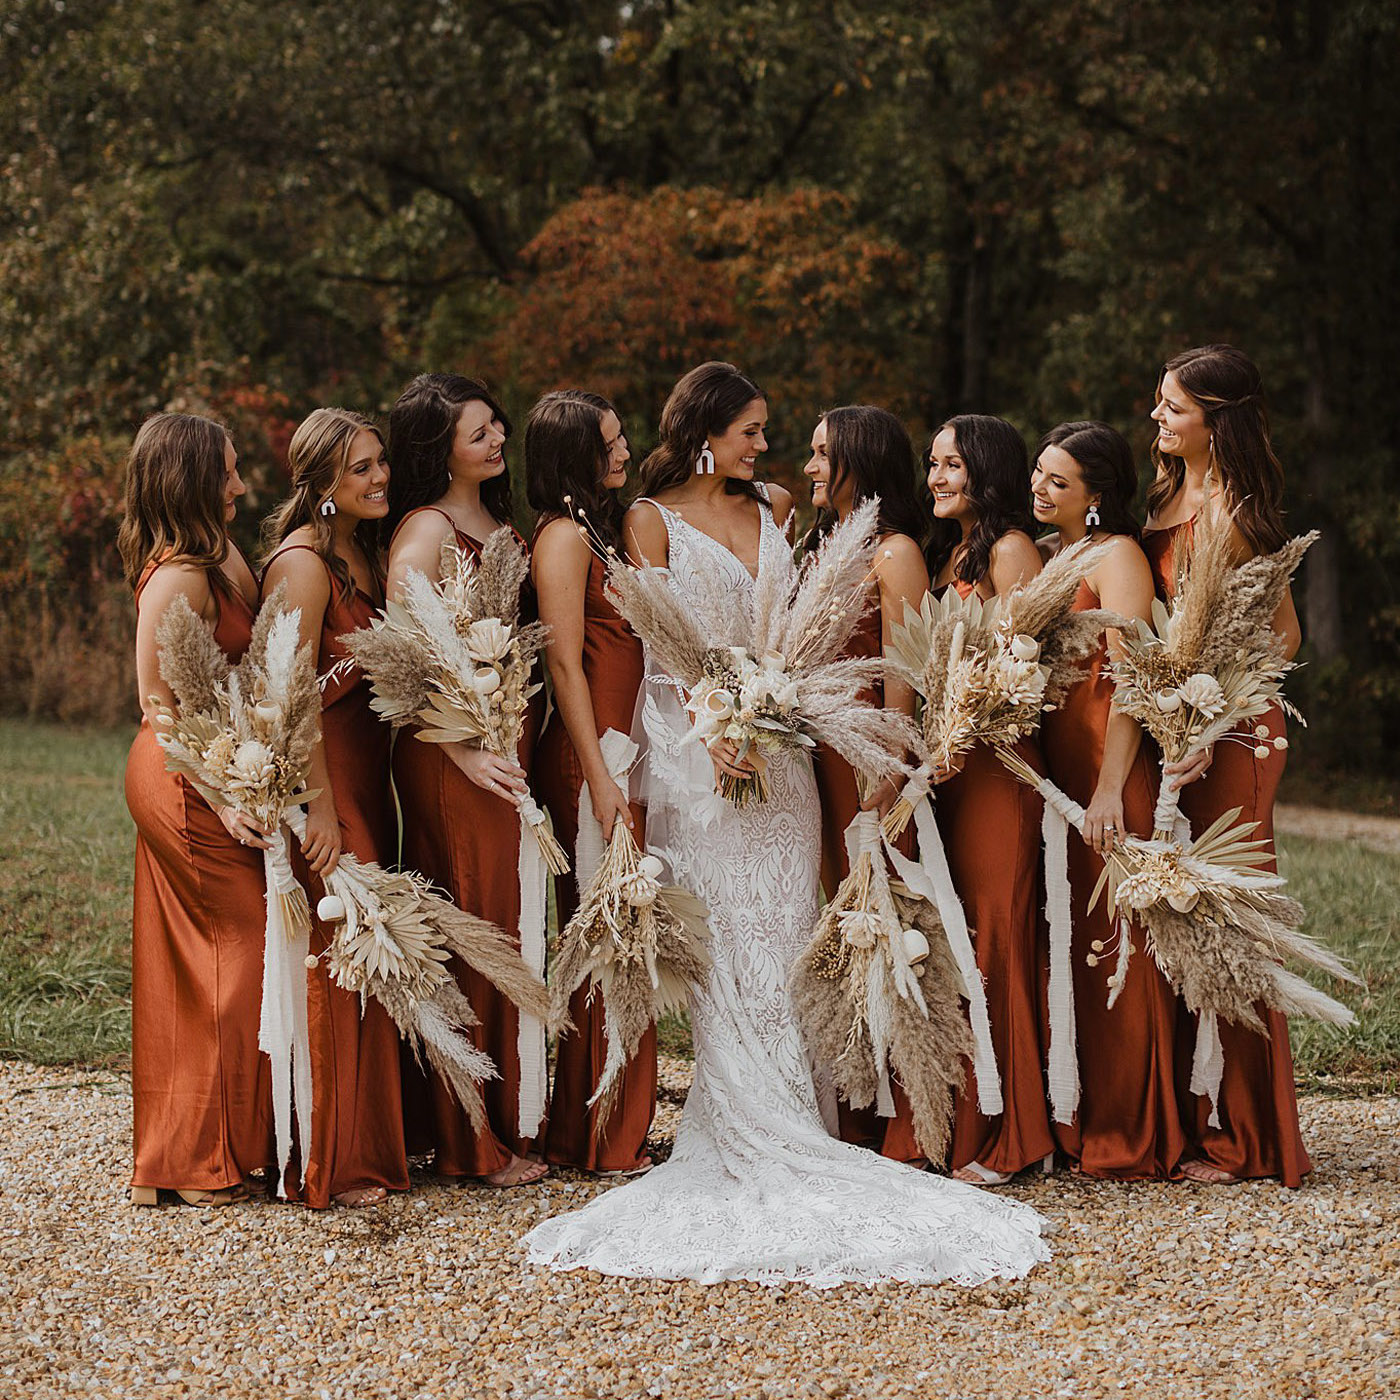 The Maid Of Honor Wearing A Different Dress: 52 Cool Ideas - Weddingomania